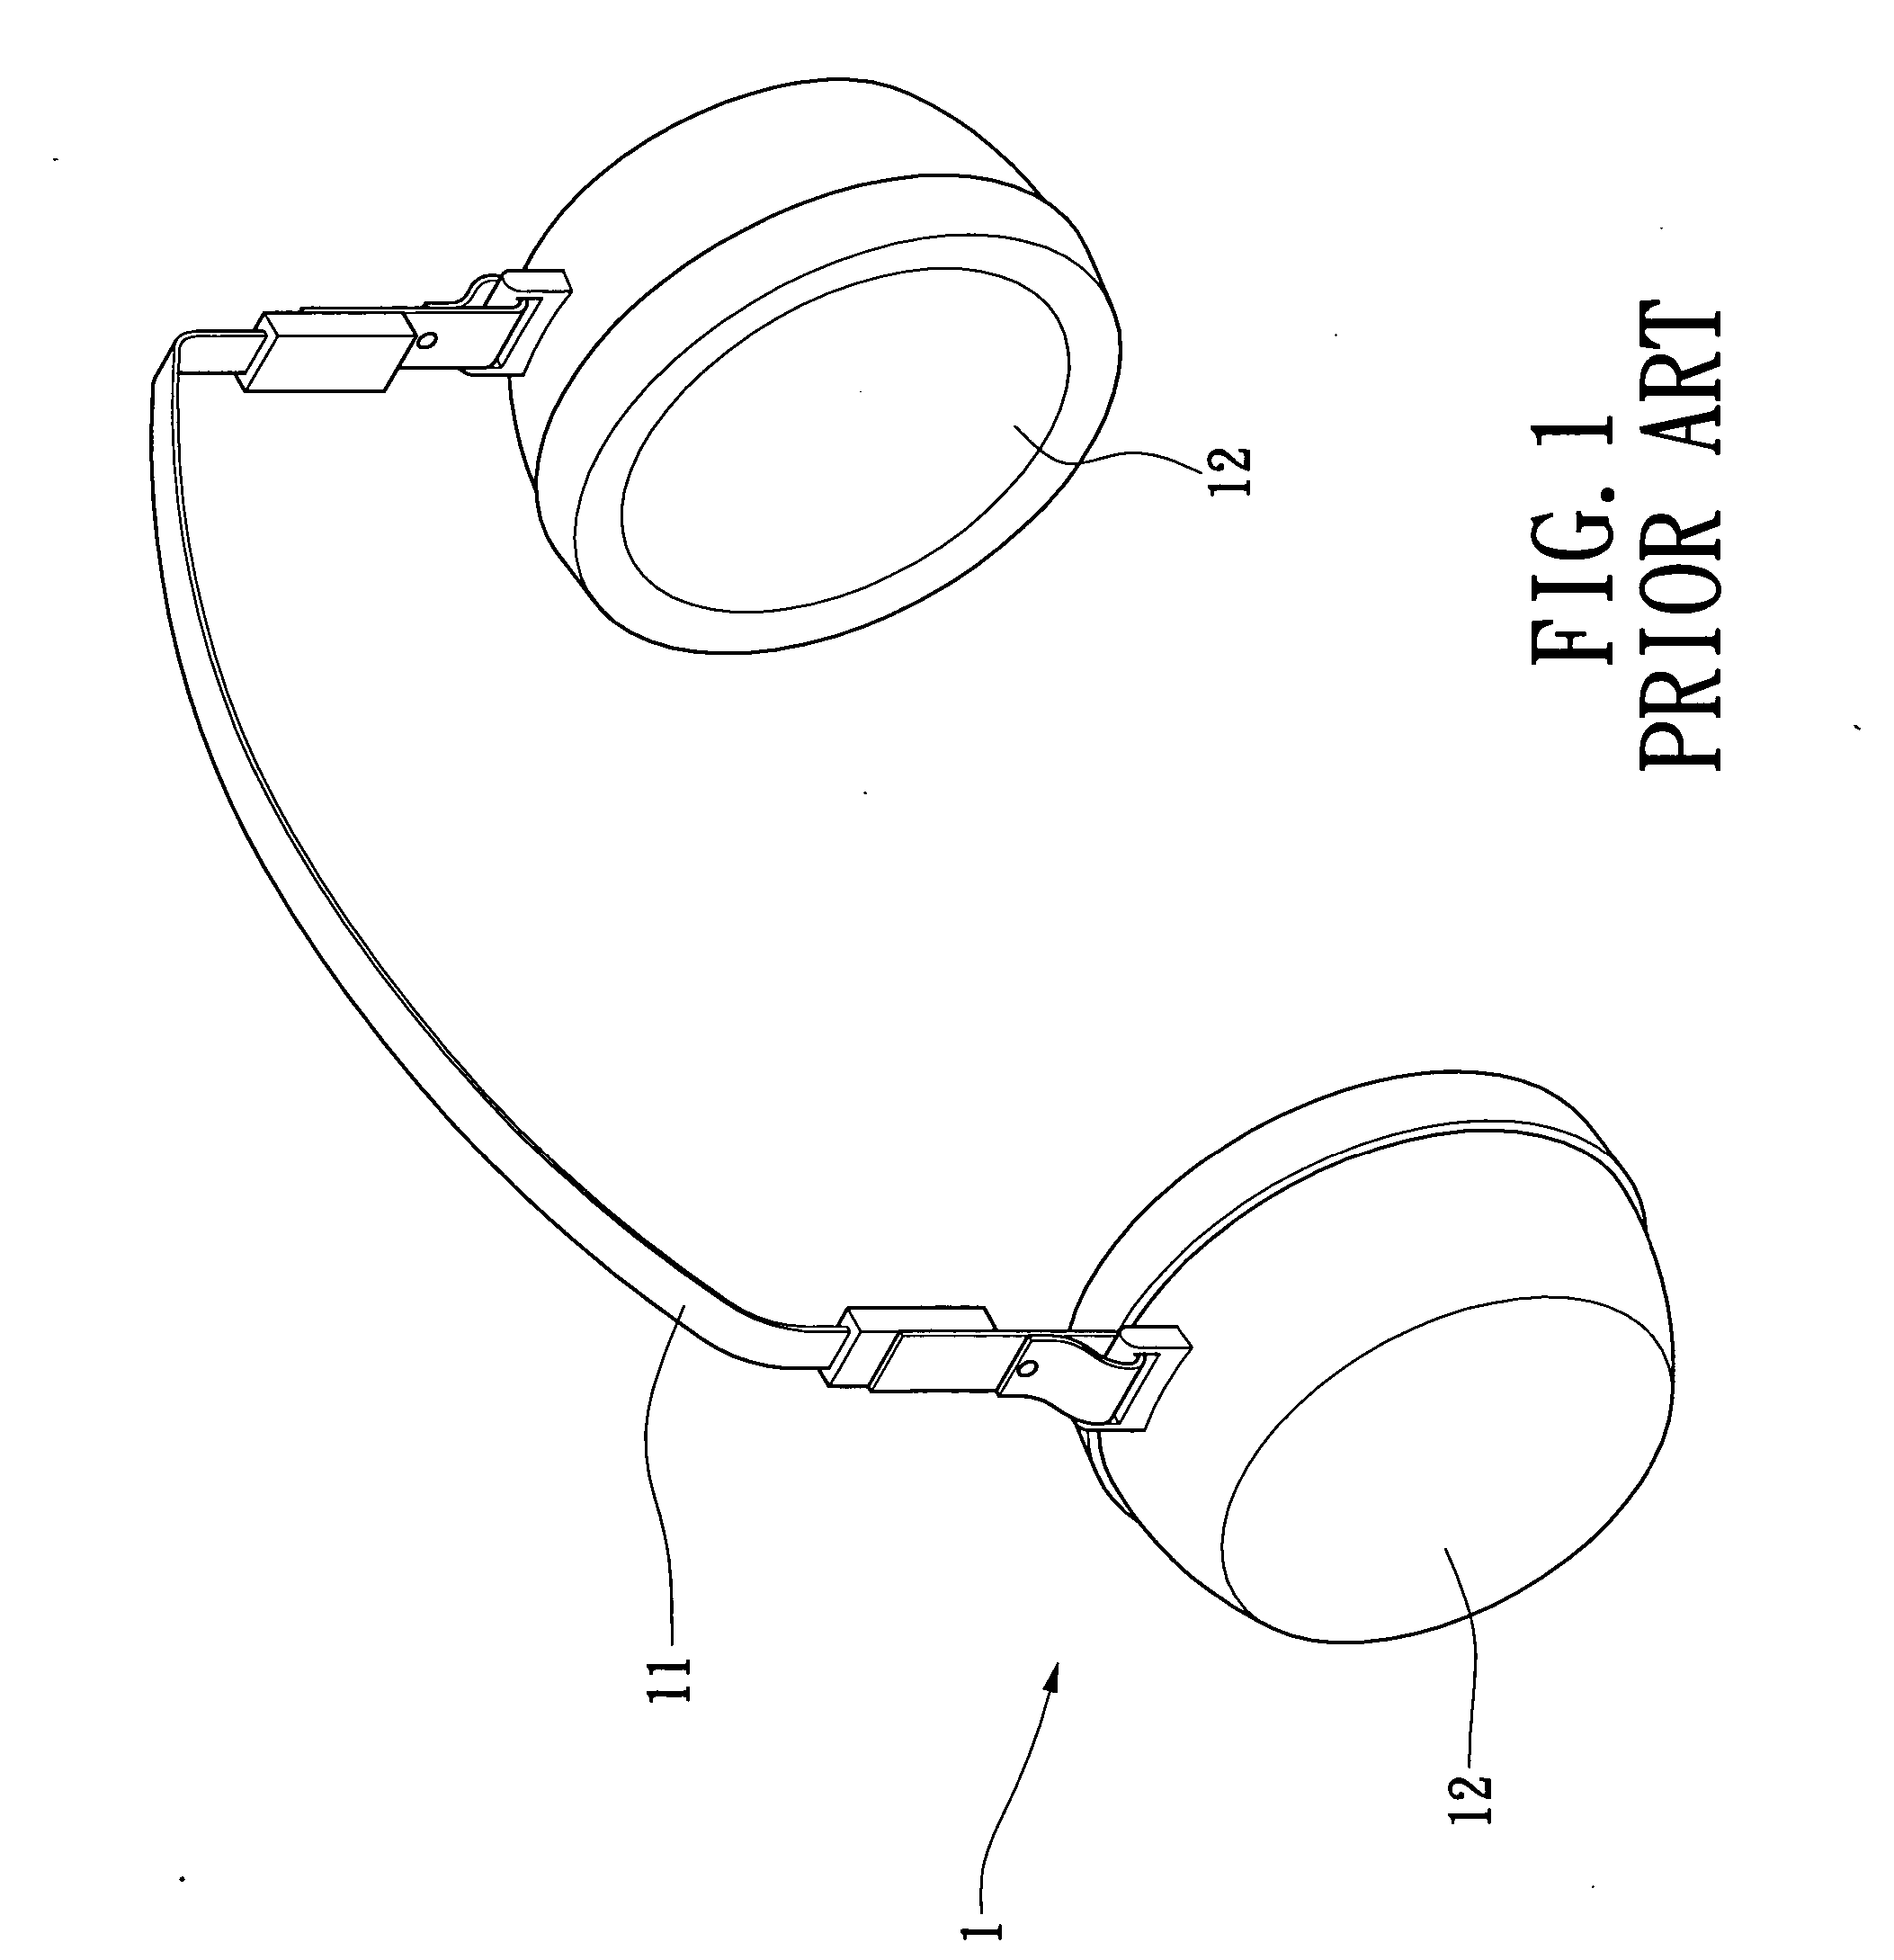 Modified earphone structure having closable opening